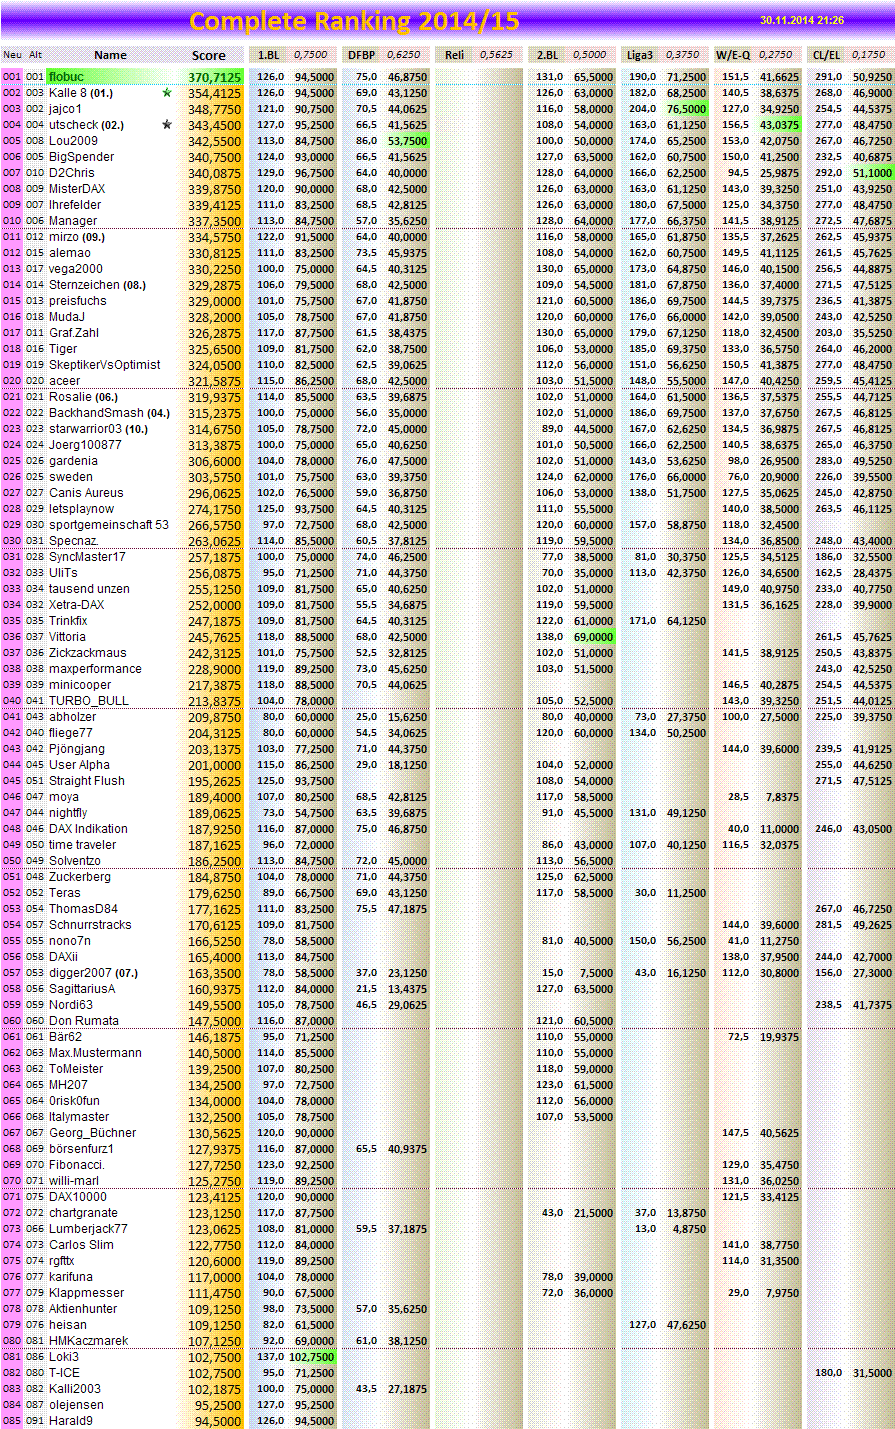 completeranking2014-15.png